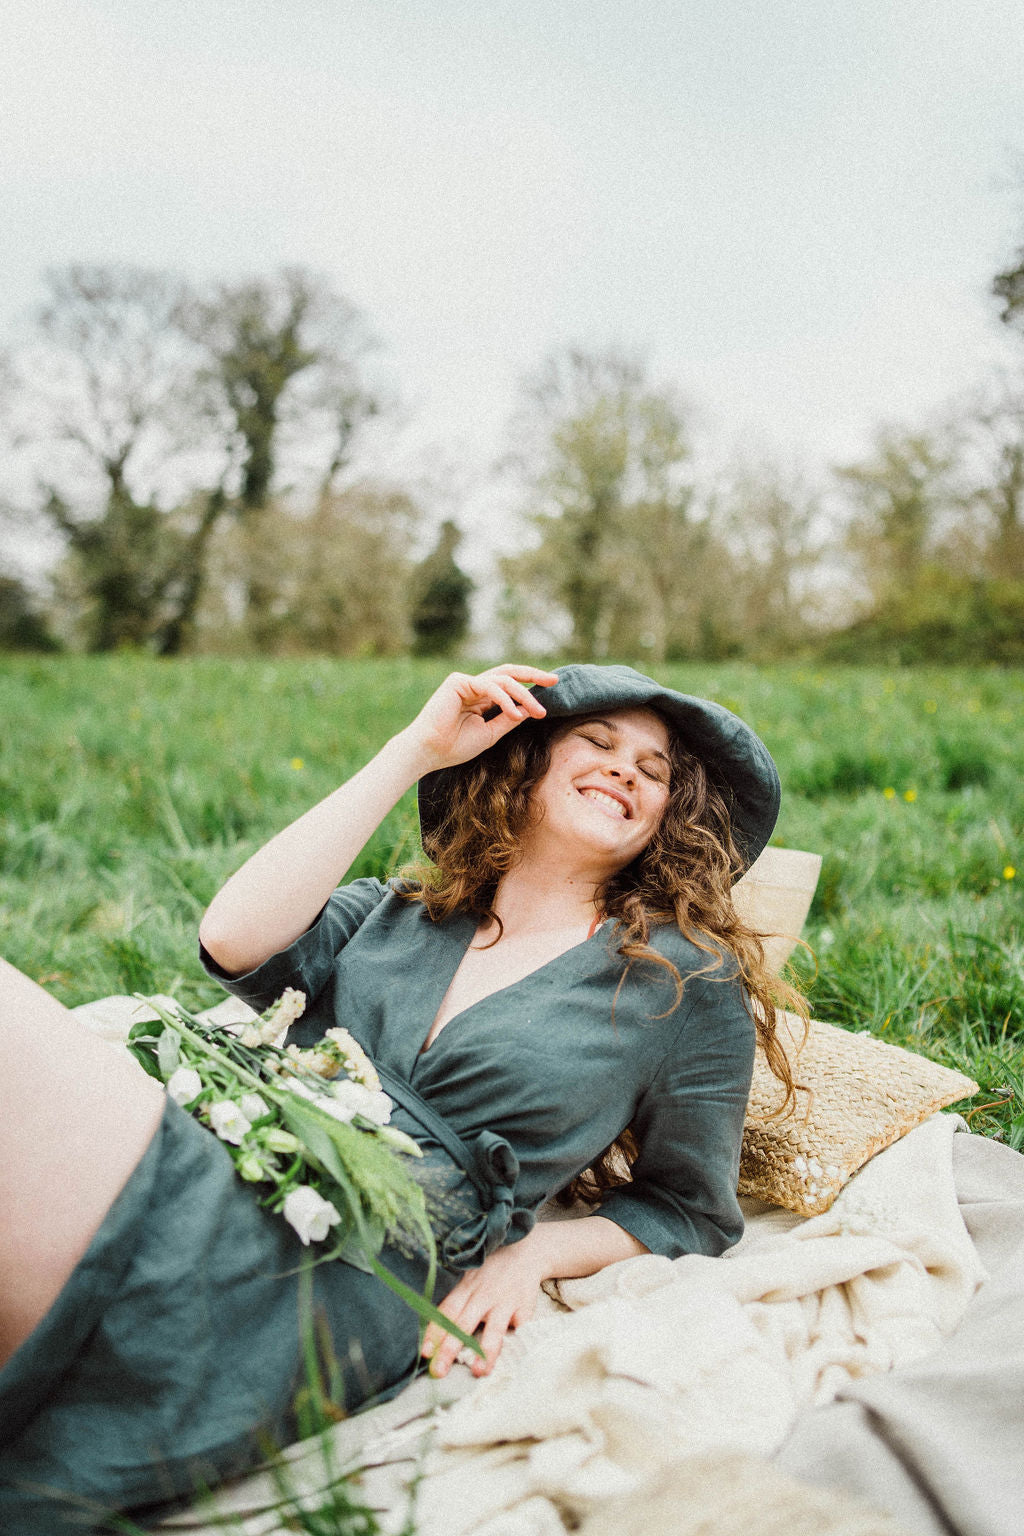 Solpardus picnic in Mawnan Smith Cornwall in field with wild flowers. Delphi linen dress Nyx linen hat. All natural ethical sustainable linen clothing perfect for sensitive skin psoriasis and eczema